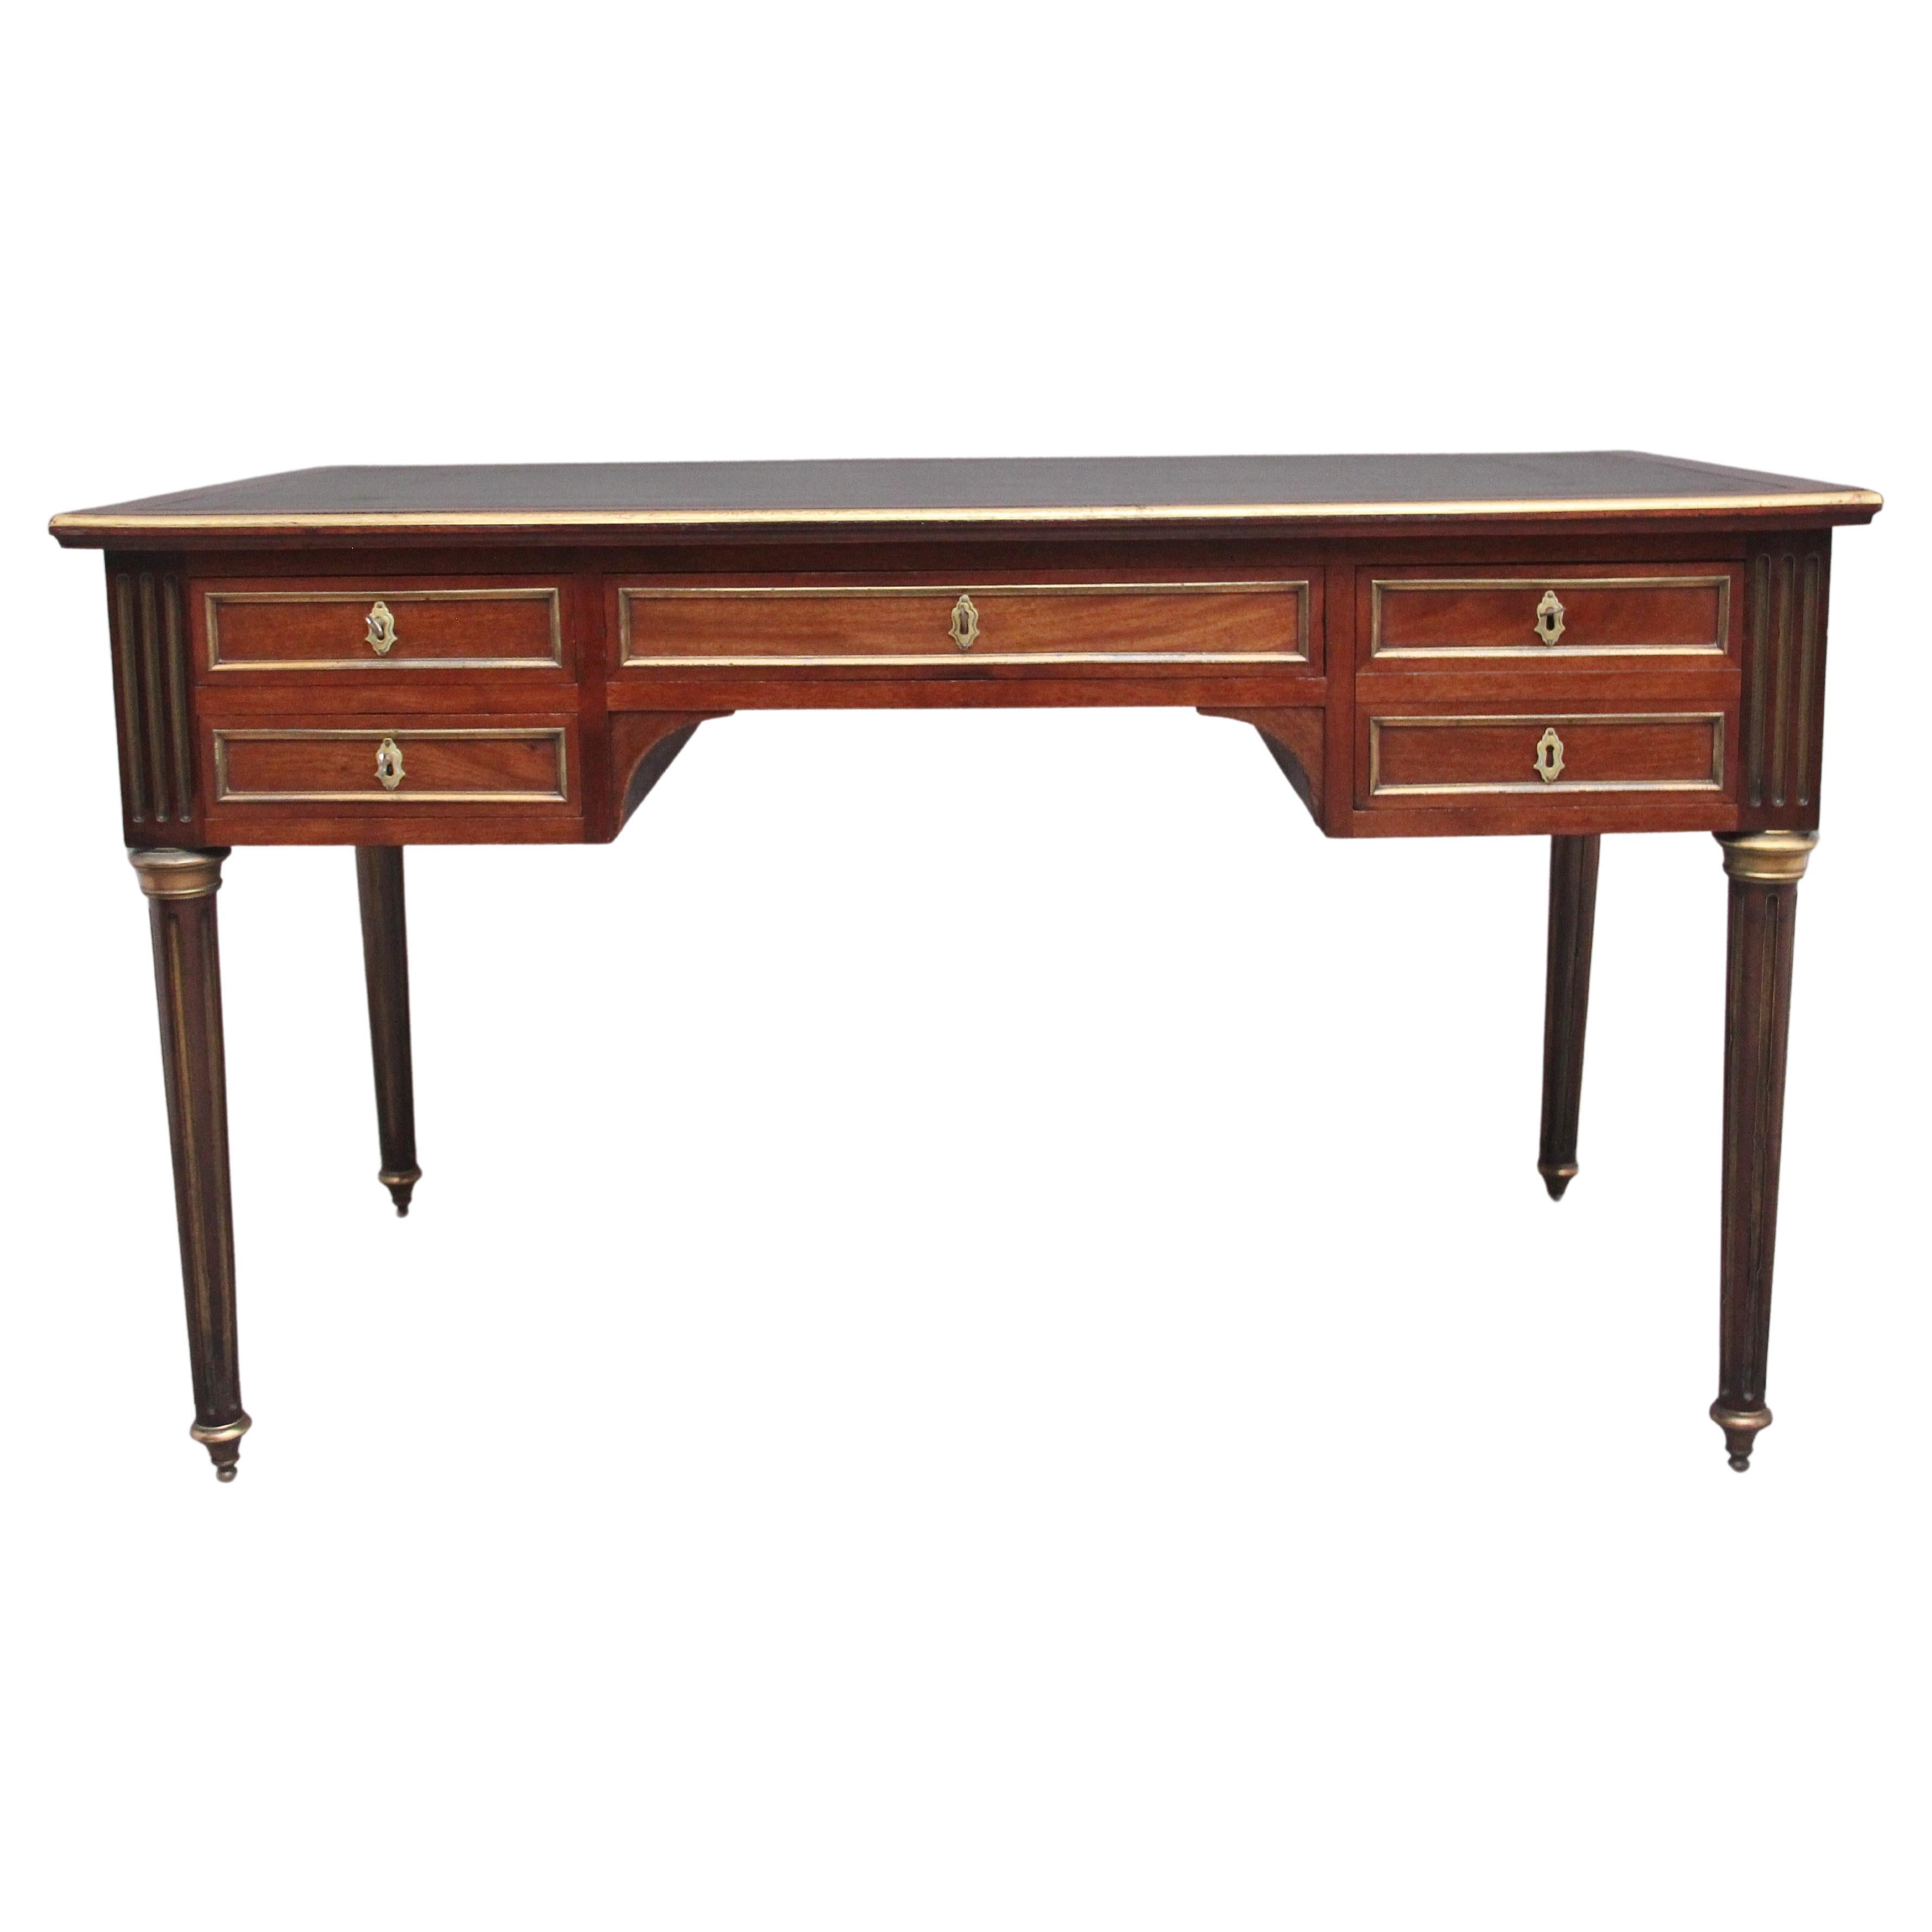 19th Century French Mahogany and Brass Inlaid Directoire Writing Desk